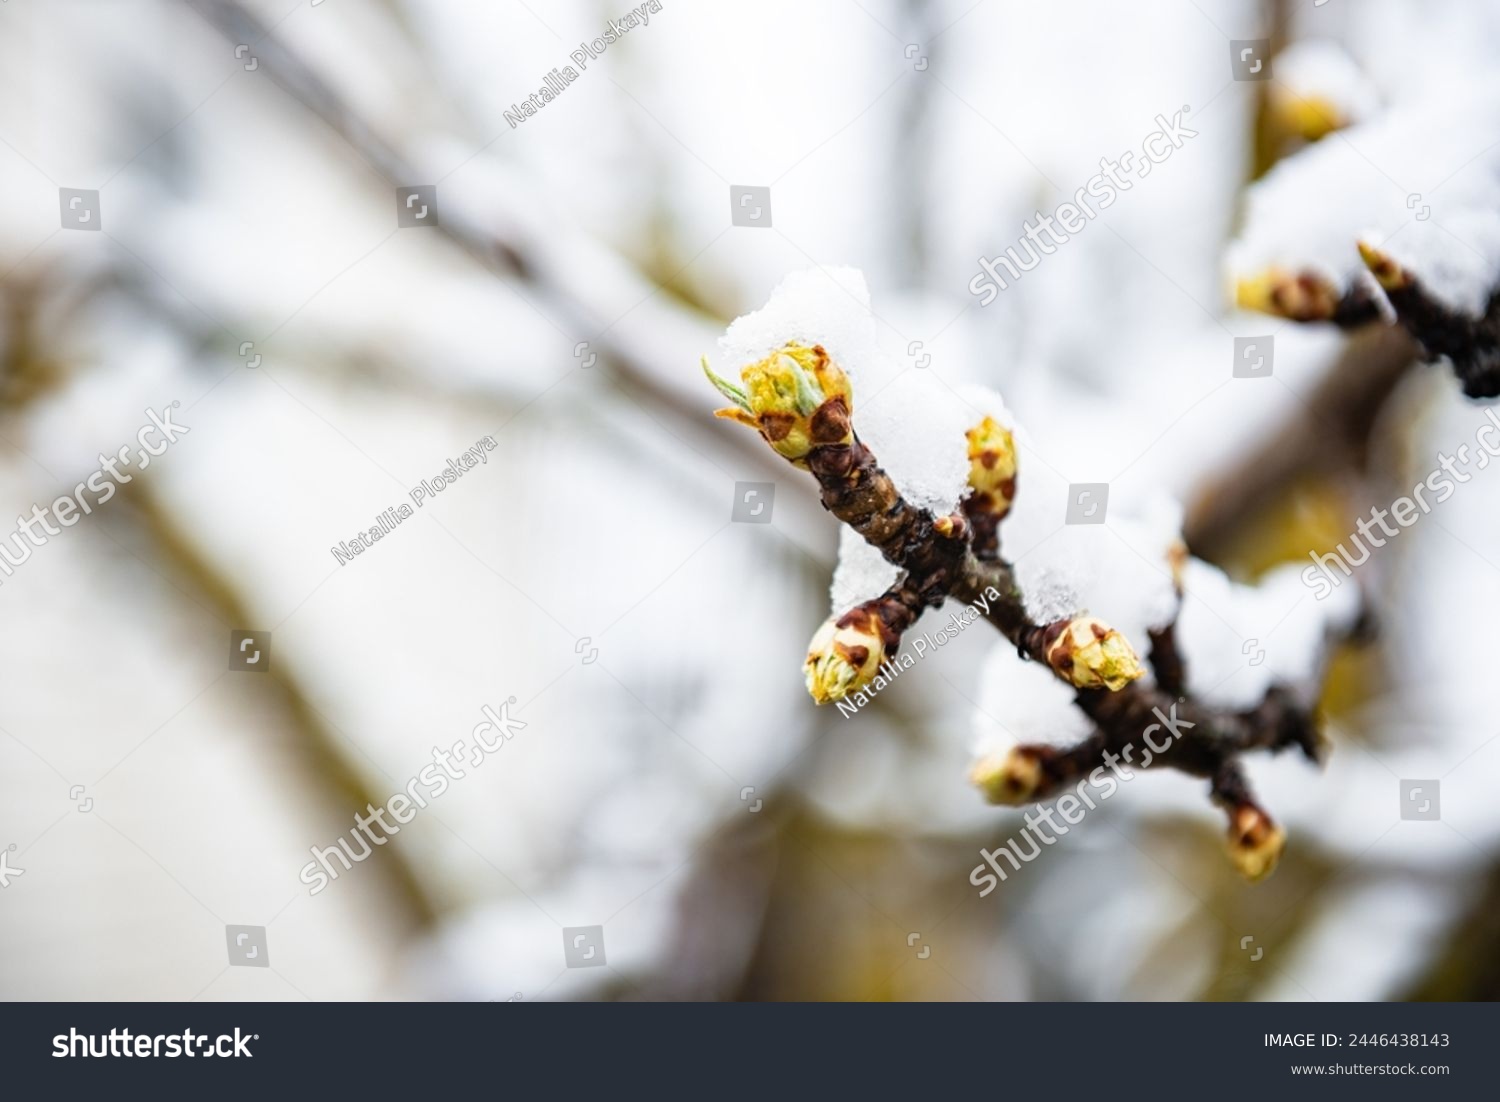 Sharp cold snap and snowfall on budding trees in spring. #2446438143